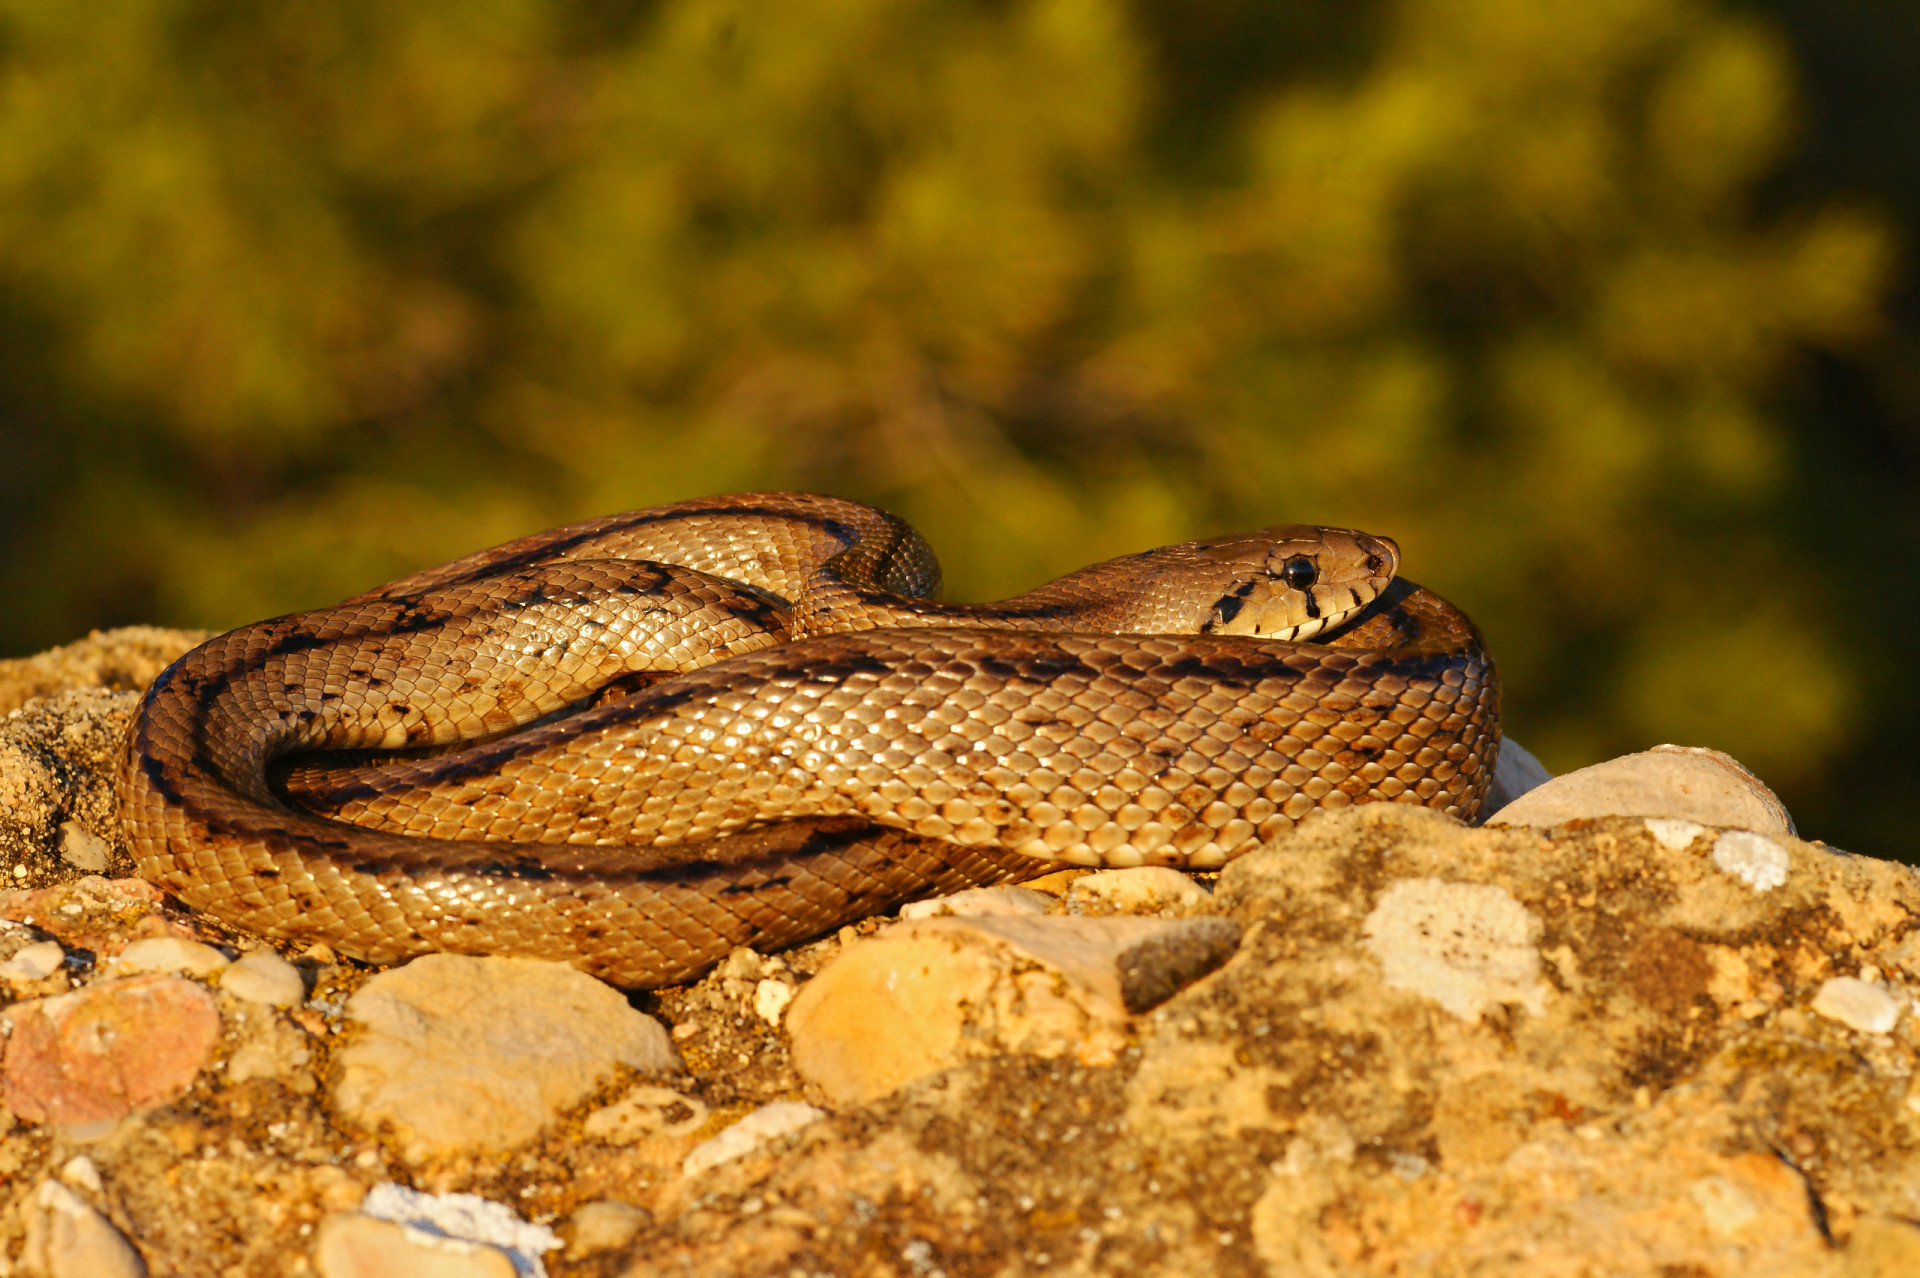 <p>This sinewy Tabernas <a href="https://www.starsinsider.com/lifestyle/493873/wonderful-desert-dwelling-wildlife" rel="noopener">Desert</a> resident is non-venomous, but beware: when it feels threatened, the ladder snake can still deliver a nasty bite. Step away if you see one!</p><p>You may also like:<a href="https://www.starsinsider.com/n/390528?utm_source=msn.com&utm_medium=display&utm_campaign=referral_description&utm_content=570754en-en"> Celebrities accused of sexual misconduct</a></p>